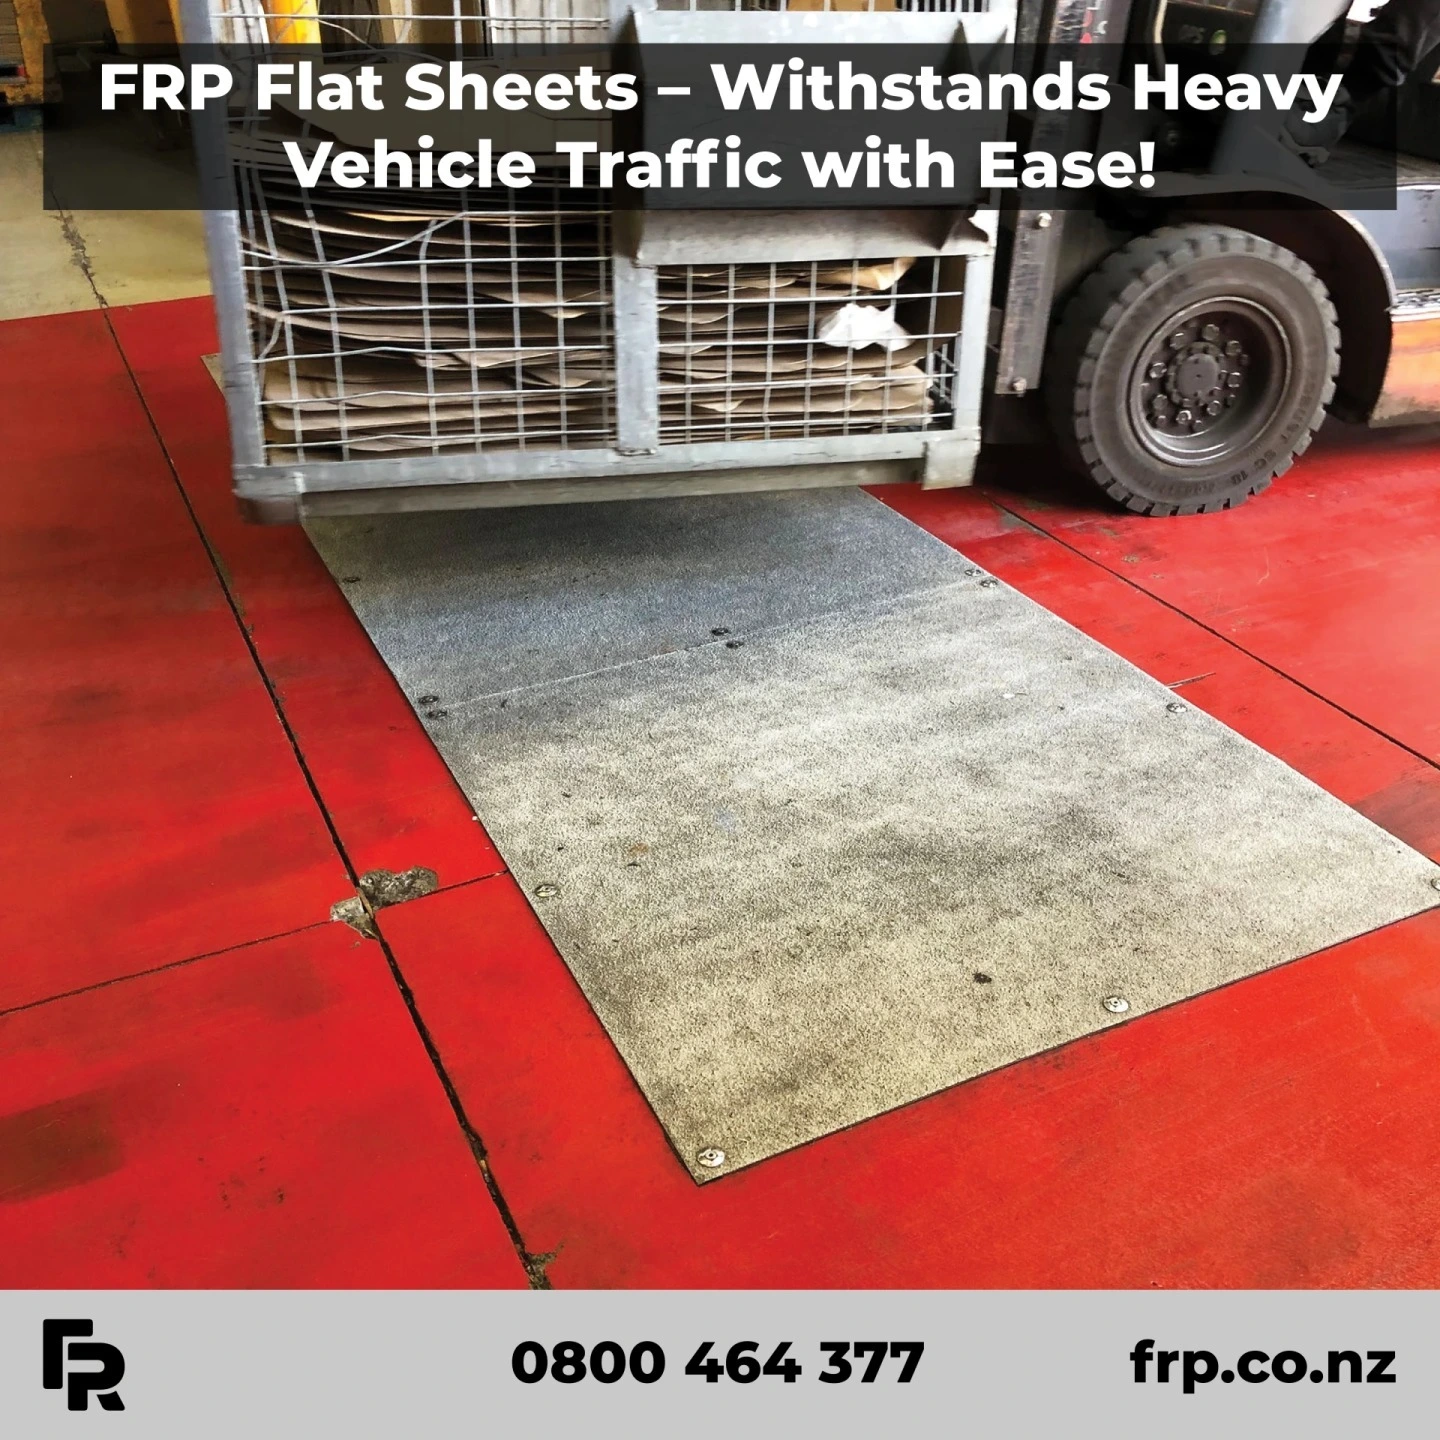 Enquire today.

#frp #frpproducts #engineers #engineering #factories #commercial #nzarchitects #nzconstruction